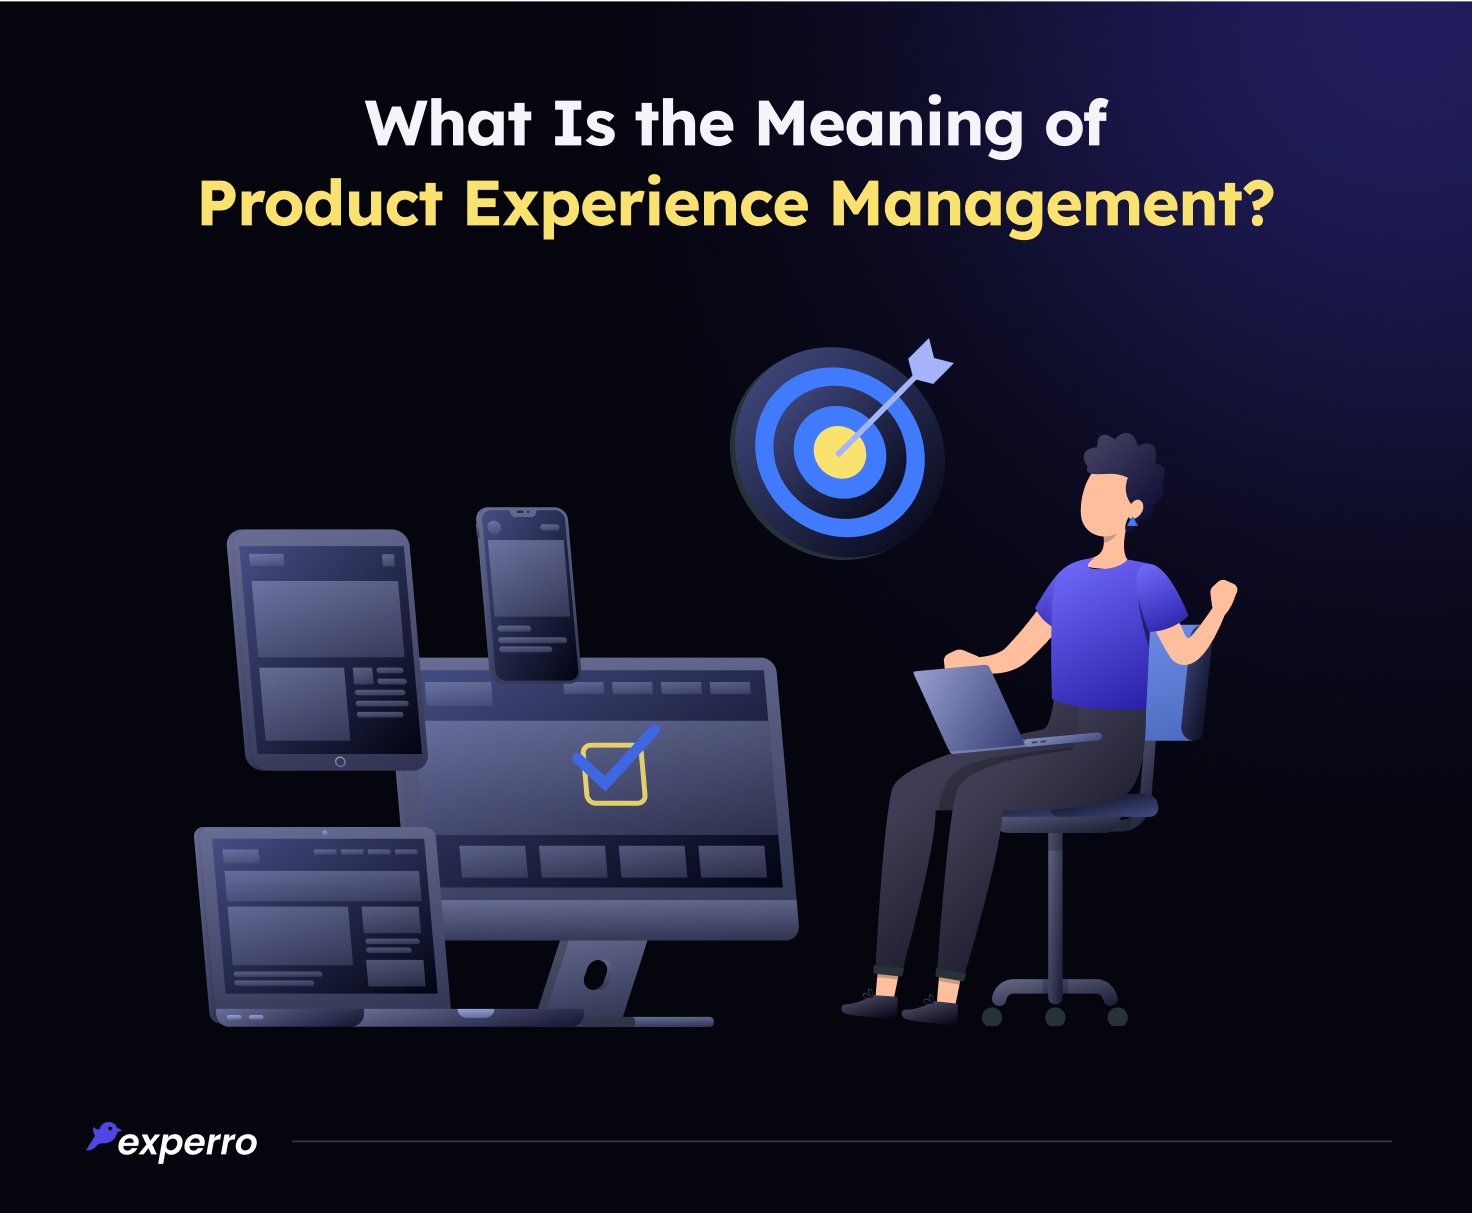 What Does Product Experience Management Mean?